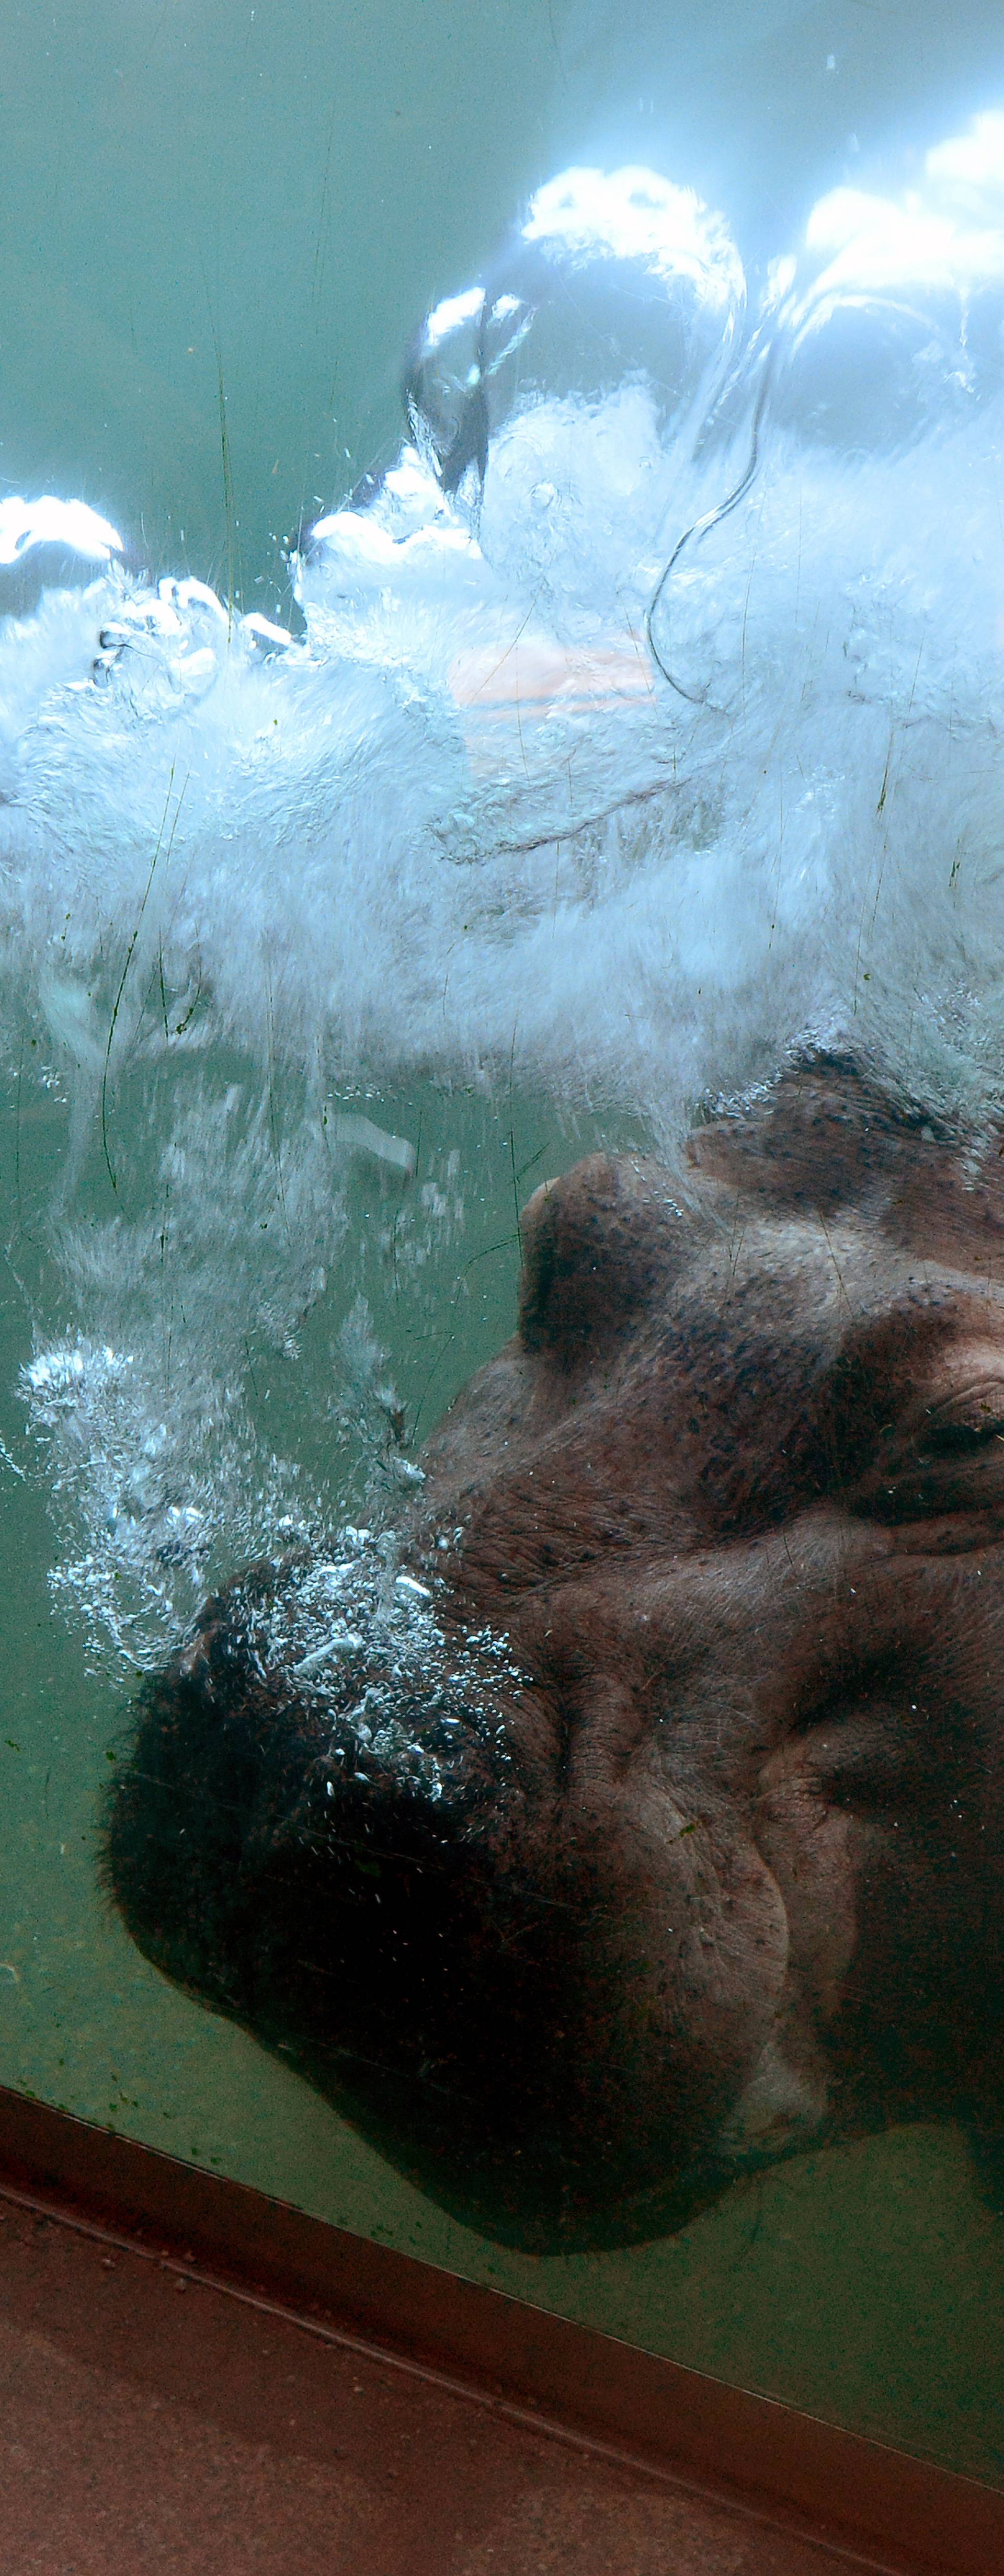 Hippo at the Berlin Zoo